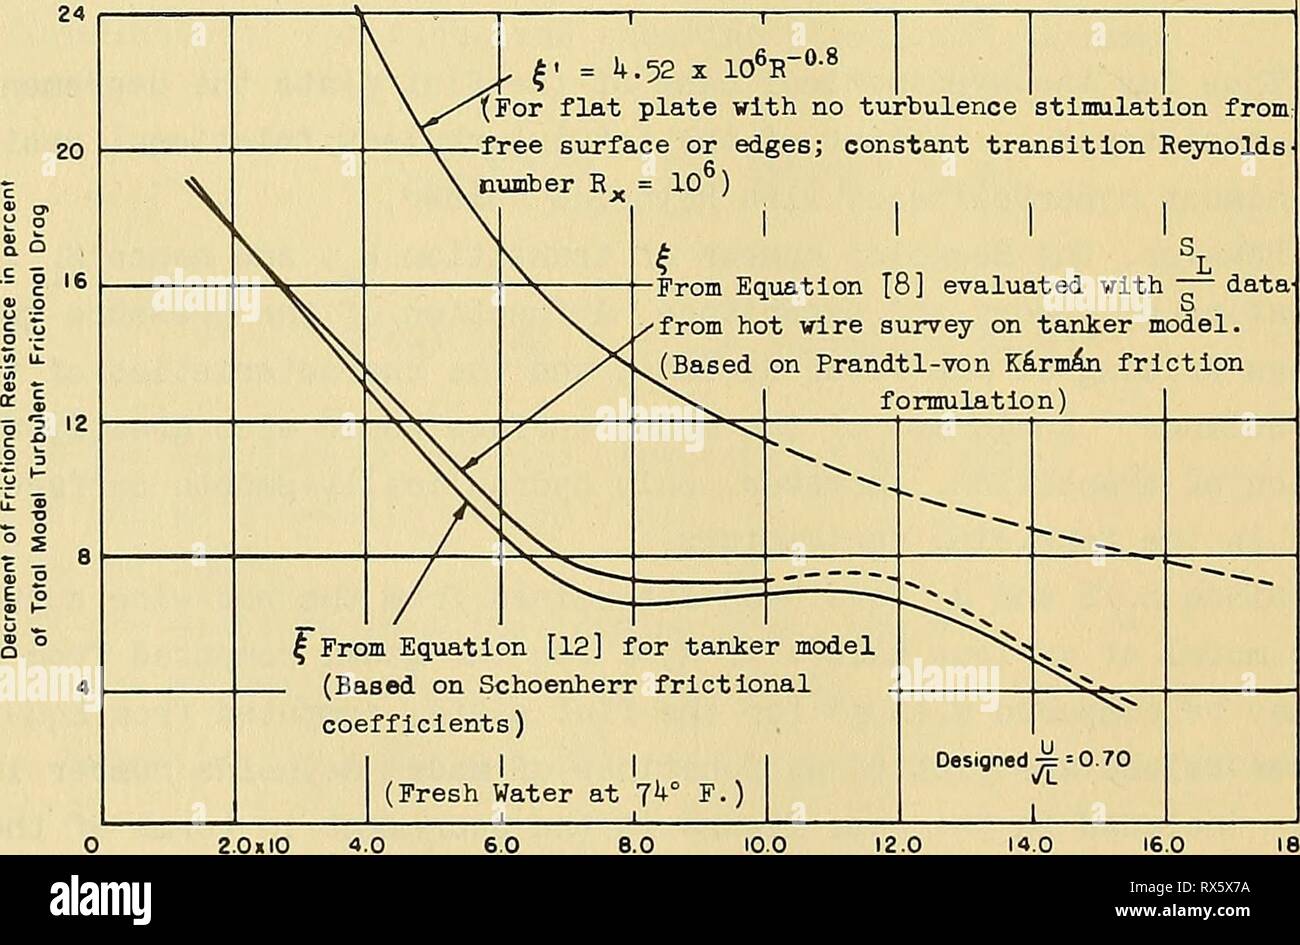 Effects of turbulence stimulators on Effects of turbulence stimulators on the boundary layer and resistance of a ship model as detected by hot wires effectsofturbule00bres Year: 1950  28 f= ?r M Ux) 'fL w [12] where £ Is the decrement computed using Schoenherr coefficients, C'f is the Schoenherr frictlonal coefficient, and C„T = 1.328 R 'V2 is the Blasius laminar frictional coefficient. I Jj x As was to be expected, the agreement between Equations [8] and [12] is very good. However, for the sake of consistency with present practice, values of J determined from the Schoenherr coefficients will Stock Photo